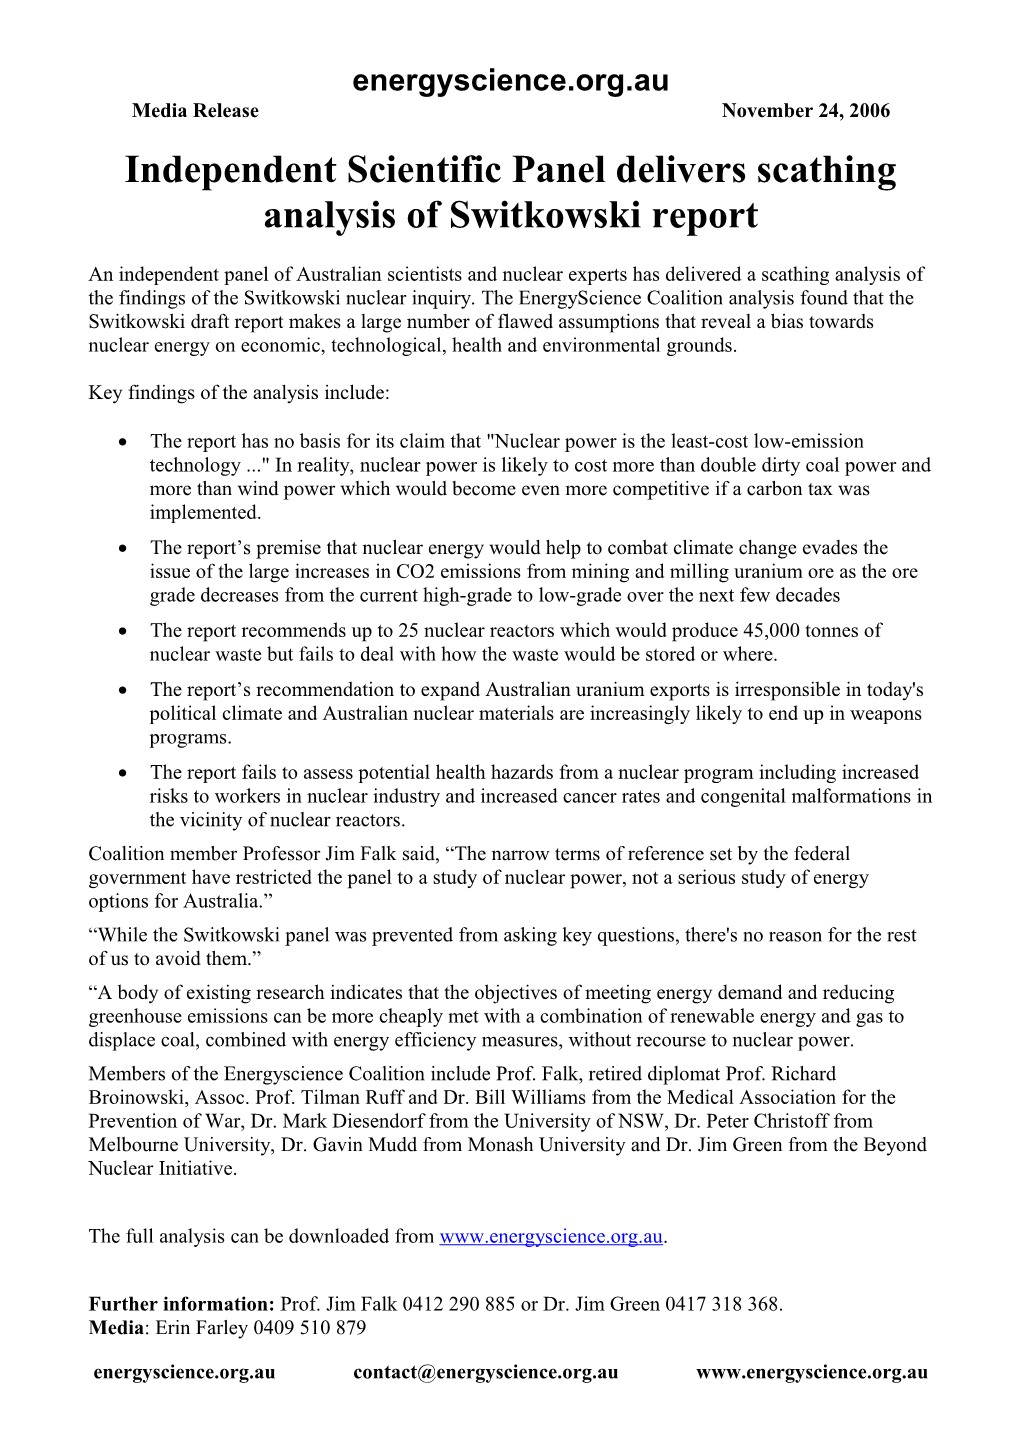 Independent Scientific Panel Delivers Scathing Analysis of Switkowski Report